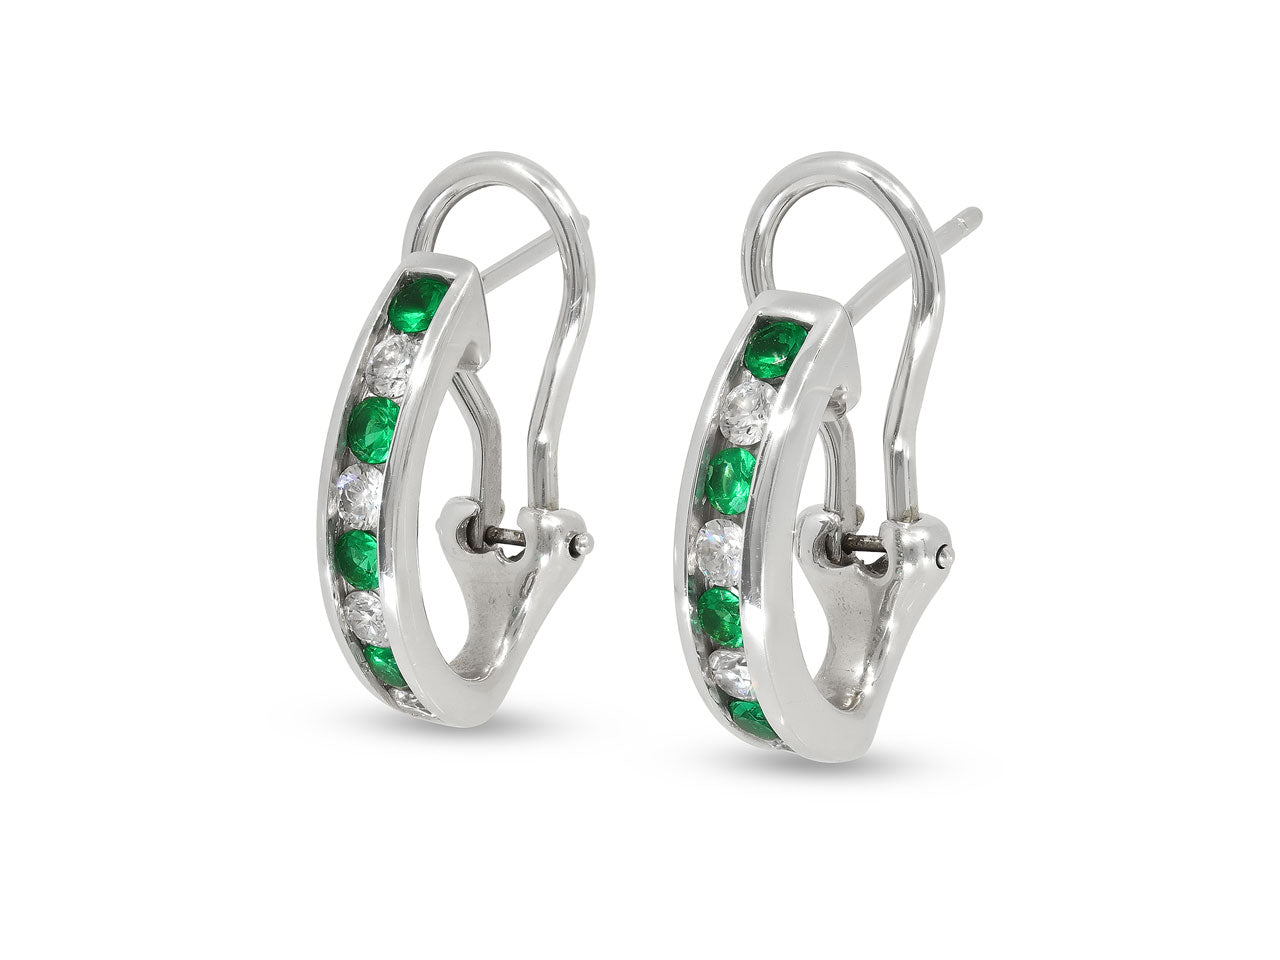 Tiffany & Co. Emerald and Diamond Earrings in 18K White Gold